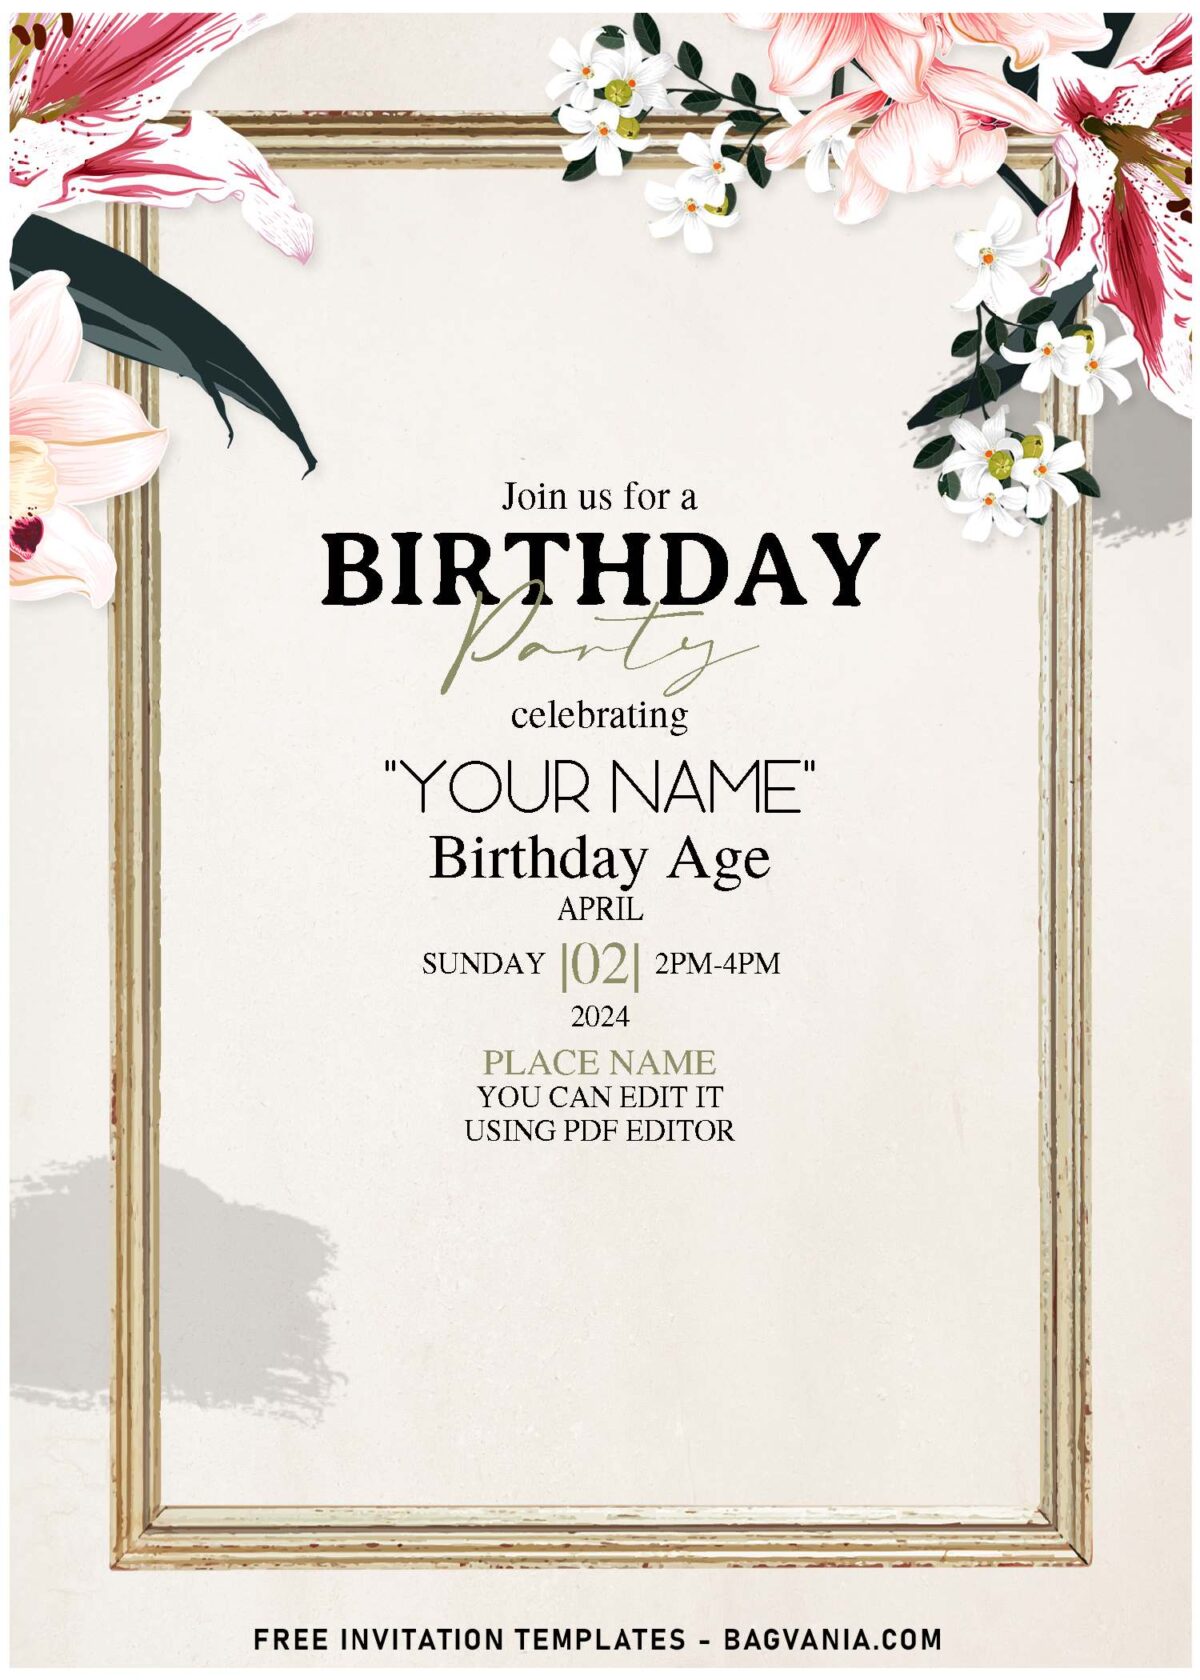 (Free Editable PDF) Beautiful Boho Orchid Floral Birthday Invitation Templates with elegant white orchid